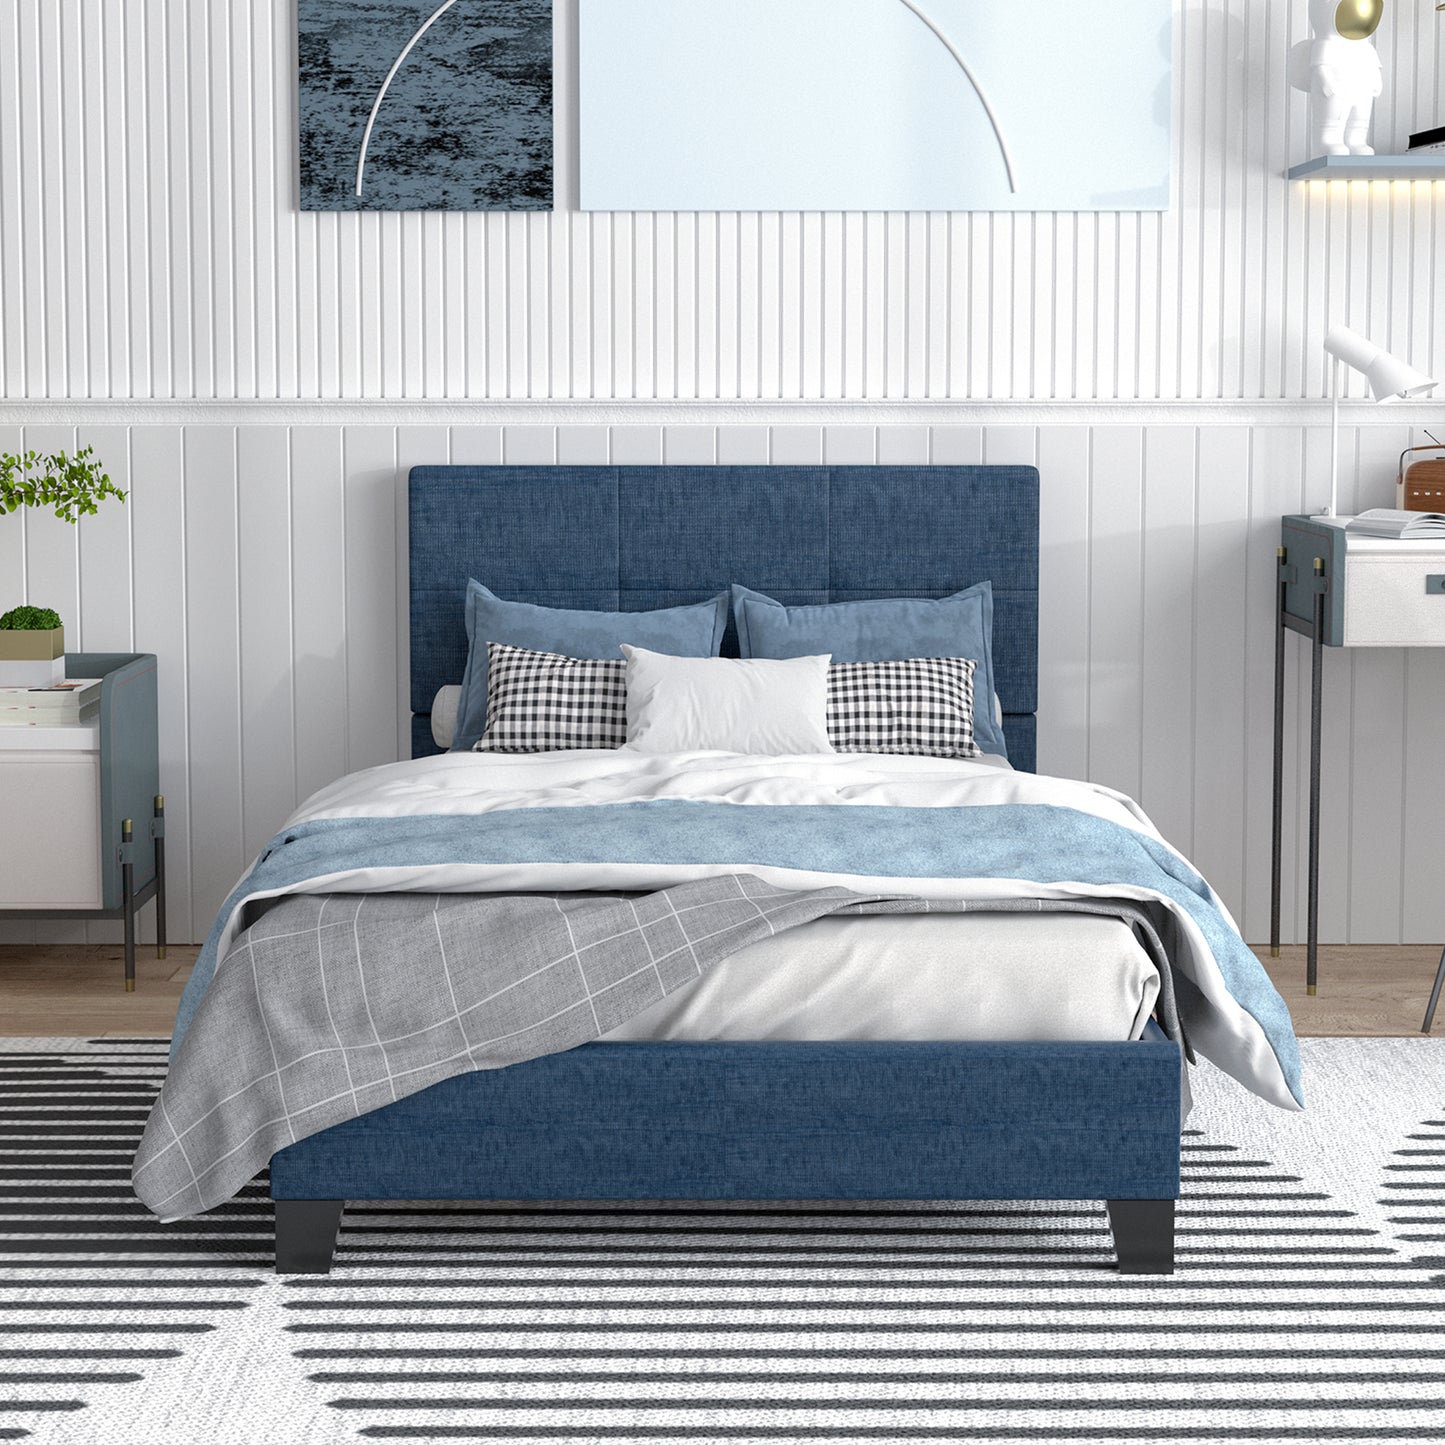 Dark Blue Upholstered Fabric Platform Bed Frame Queen Size with Tufted Square Stitched Headboard, Metal Frame Mattress Foundation with Strong Wooden Slat Support, 800LBS Weight Capacity